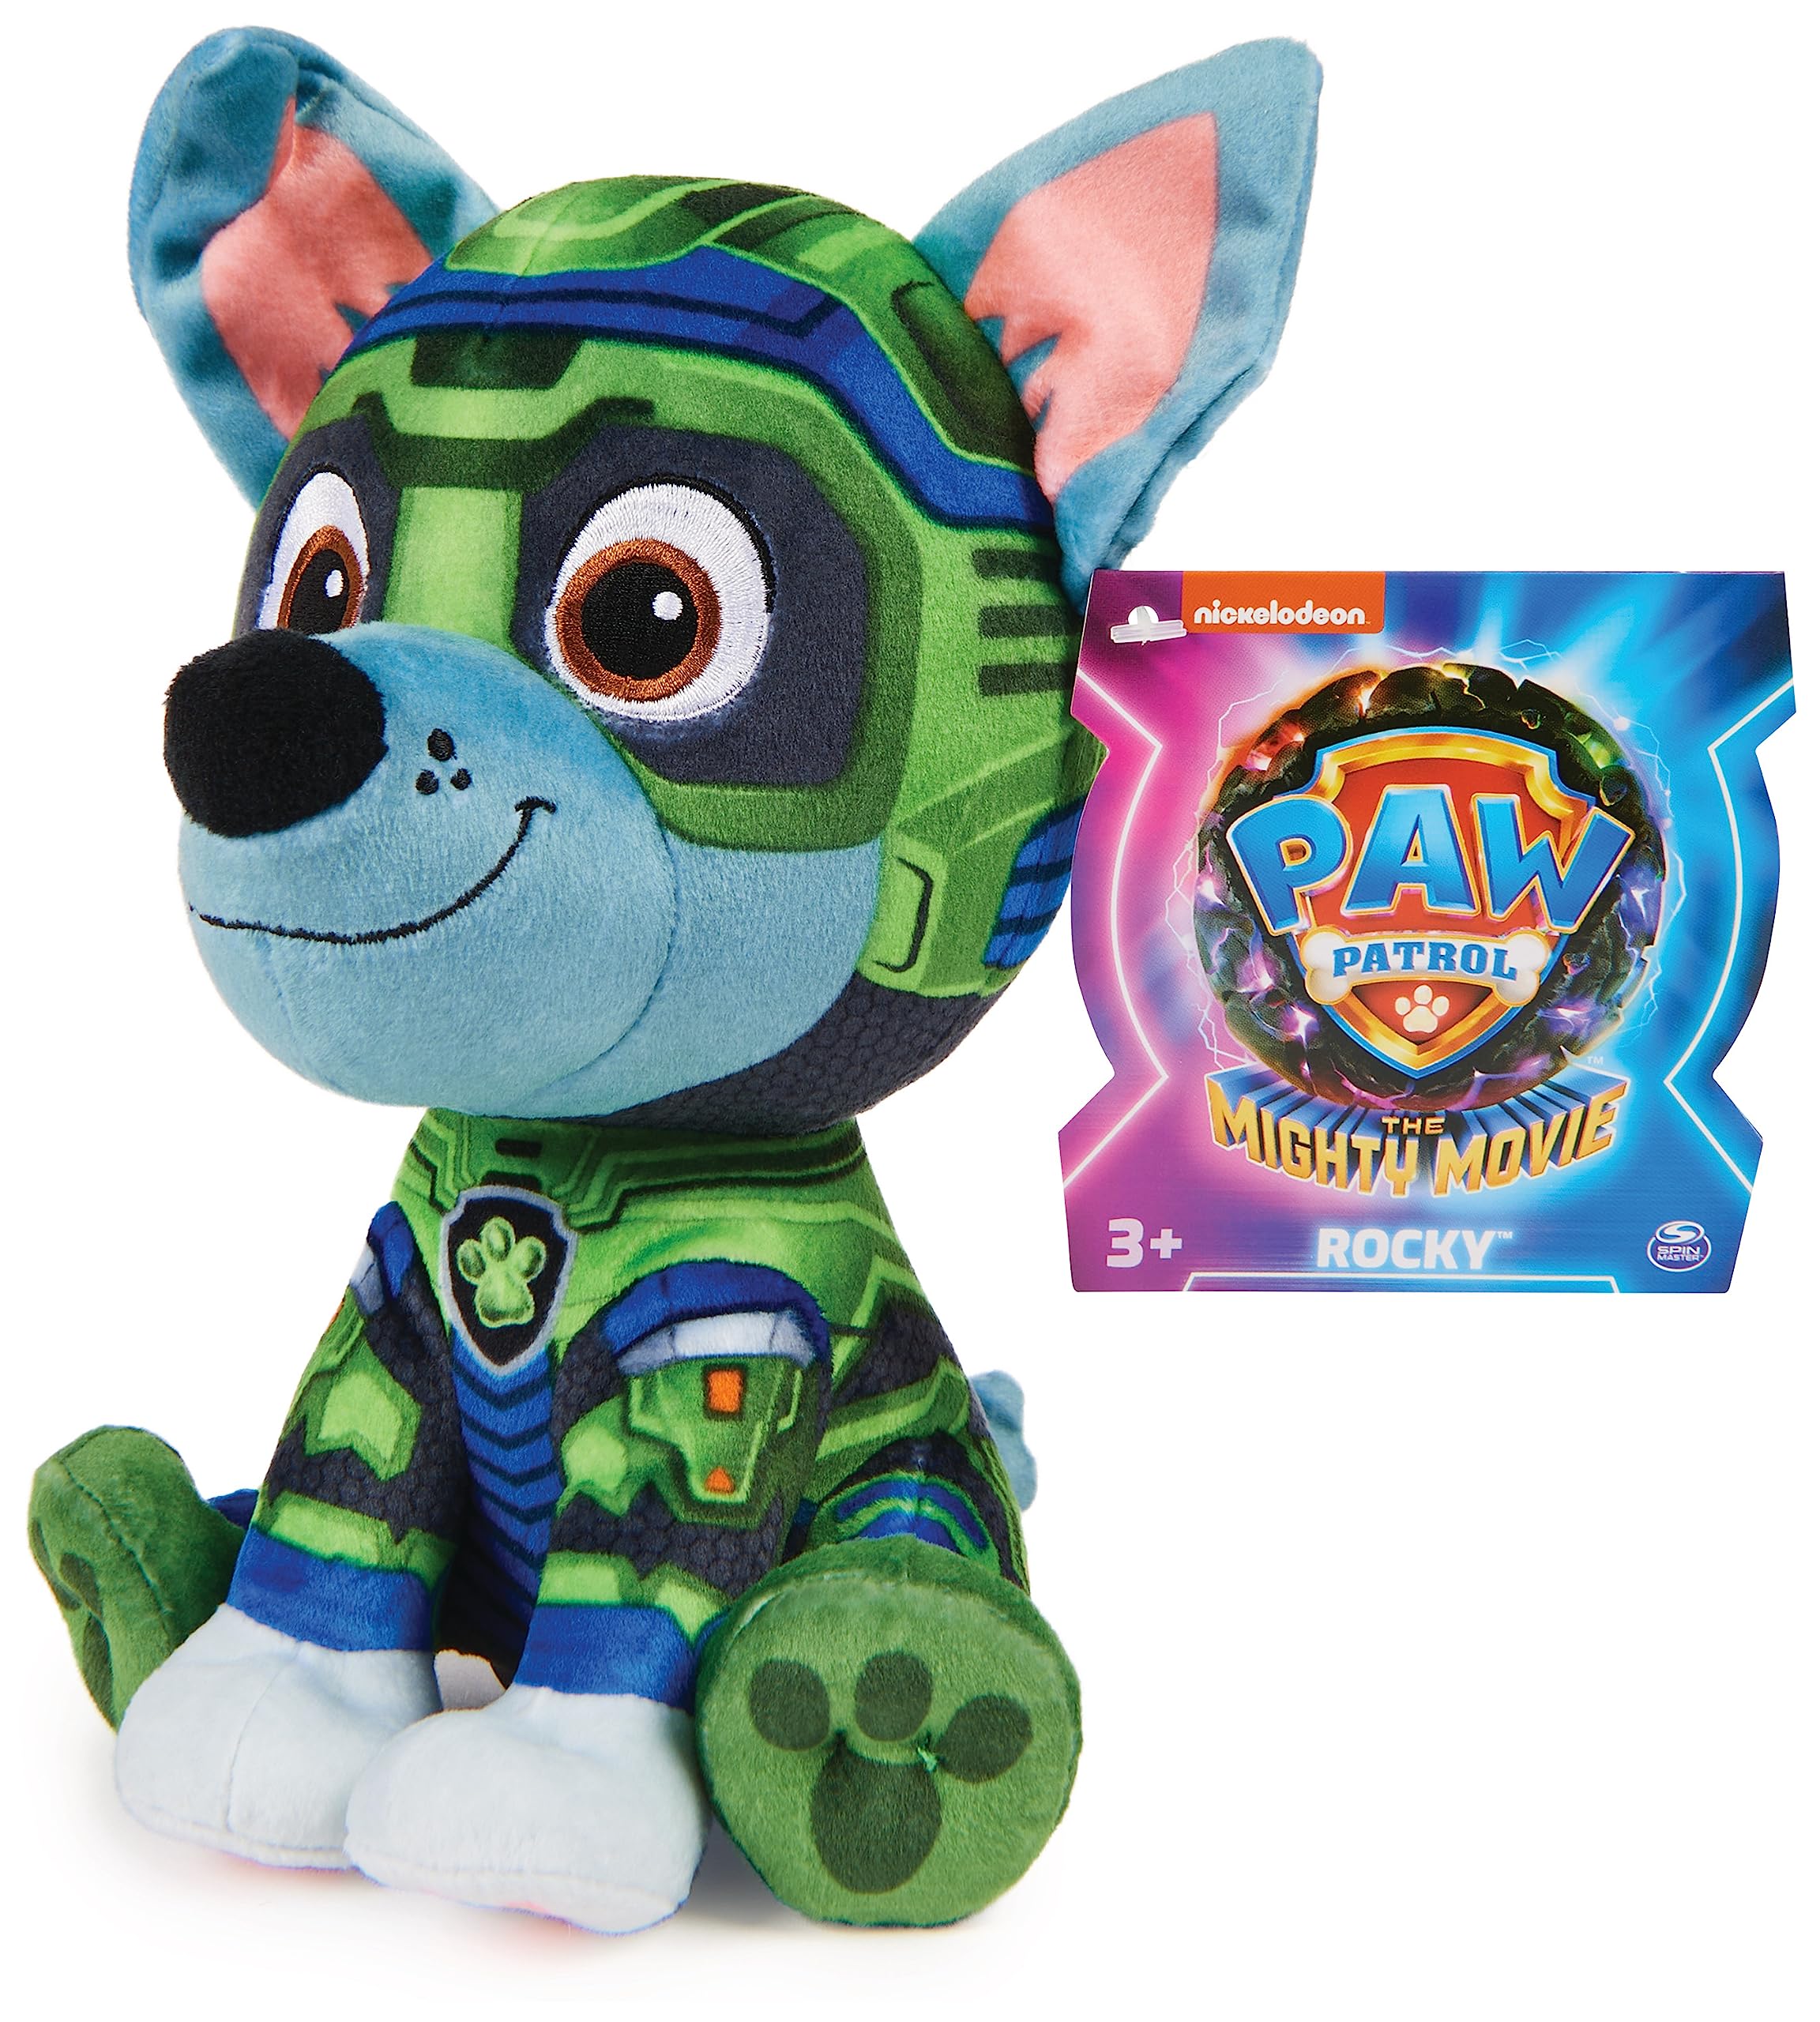 Paw Patrol GUND Mighty Movie Chase, 17 cm, Original Plush Toy for The 2023 Film Film, Ideal for Recreating Cinema Adventures and as a Favourite Cuddly Toy, Toy for Children from 1 Year